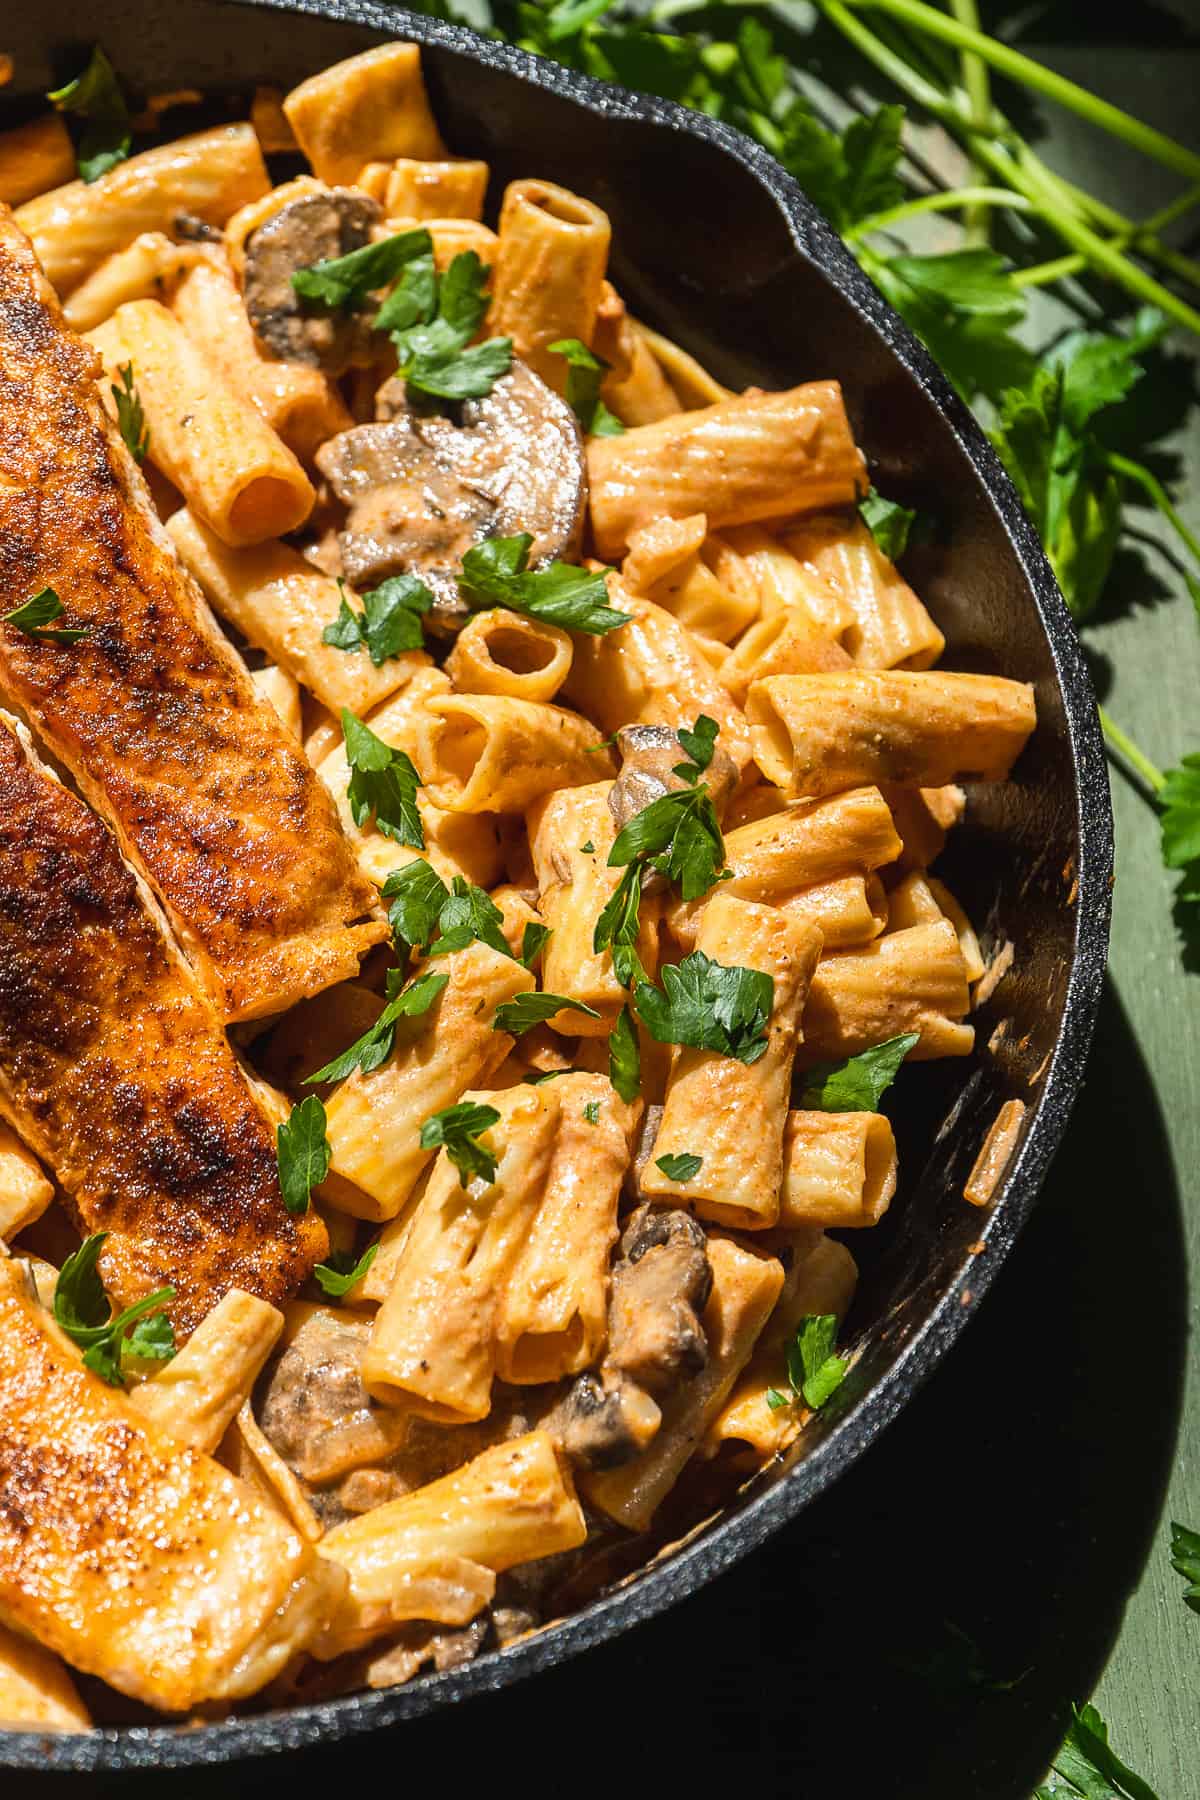 Cast iron skillet with creamy pasta and salmon.